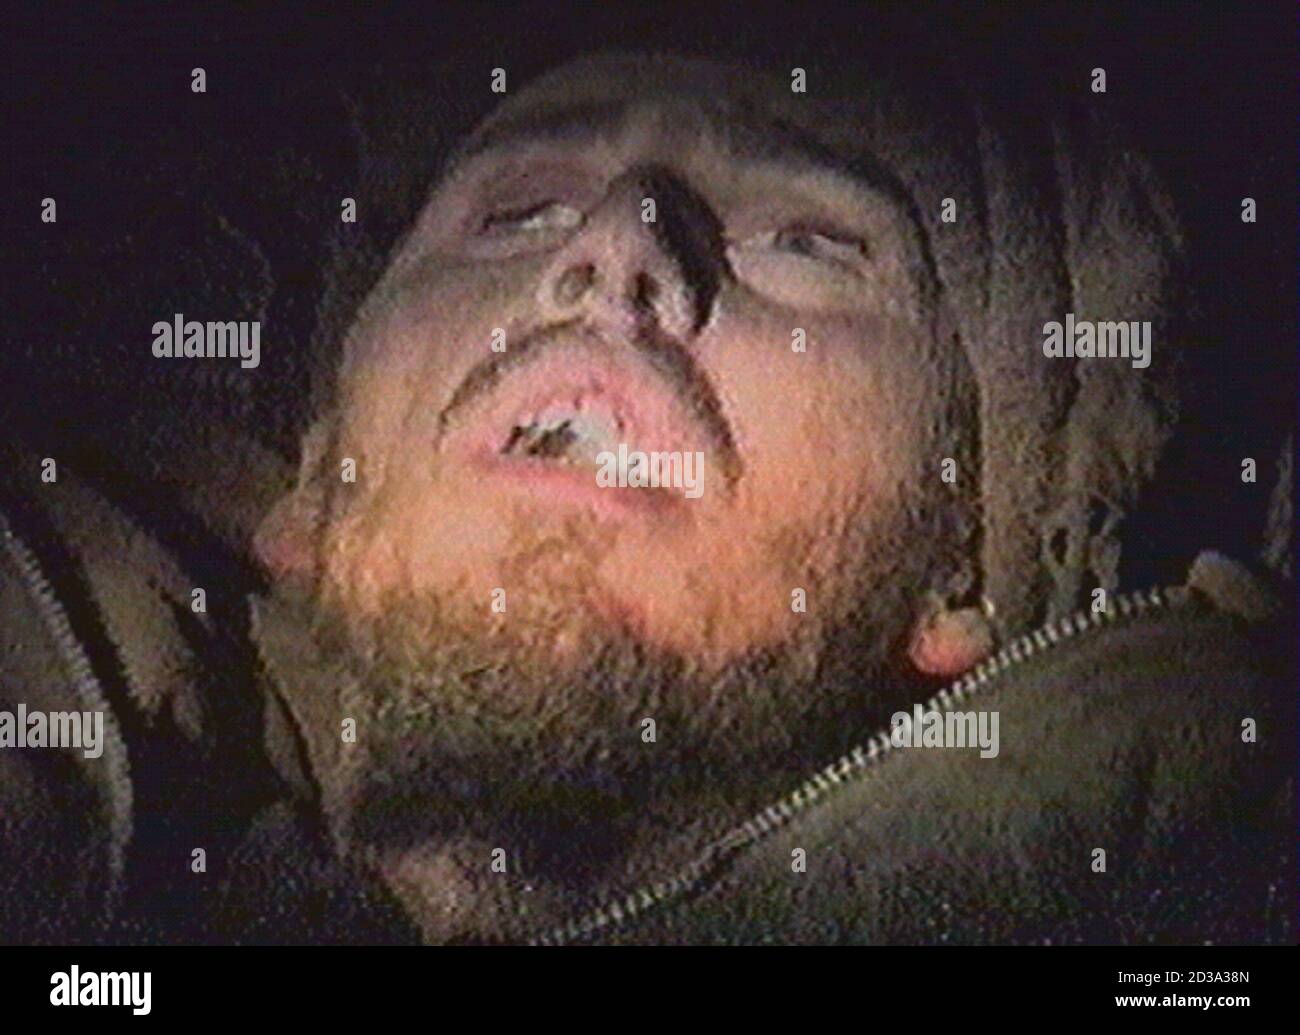 VIDEO IMAGE 24DEC01 - The body of a man, identified as Herve Djamel Loiseau  by the papers he was carrying, is pictured in Parachinar, Pakistan on  December 24, 2001. The frozen